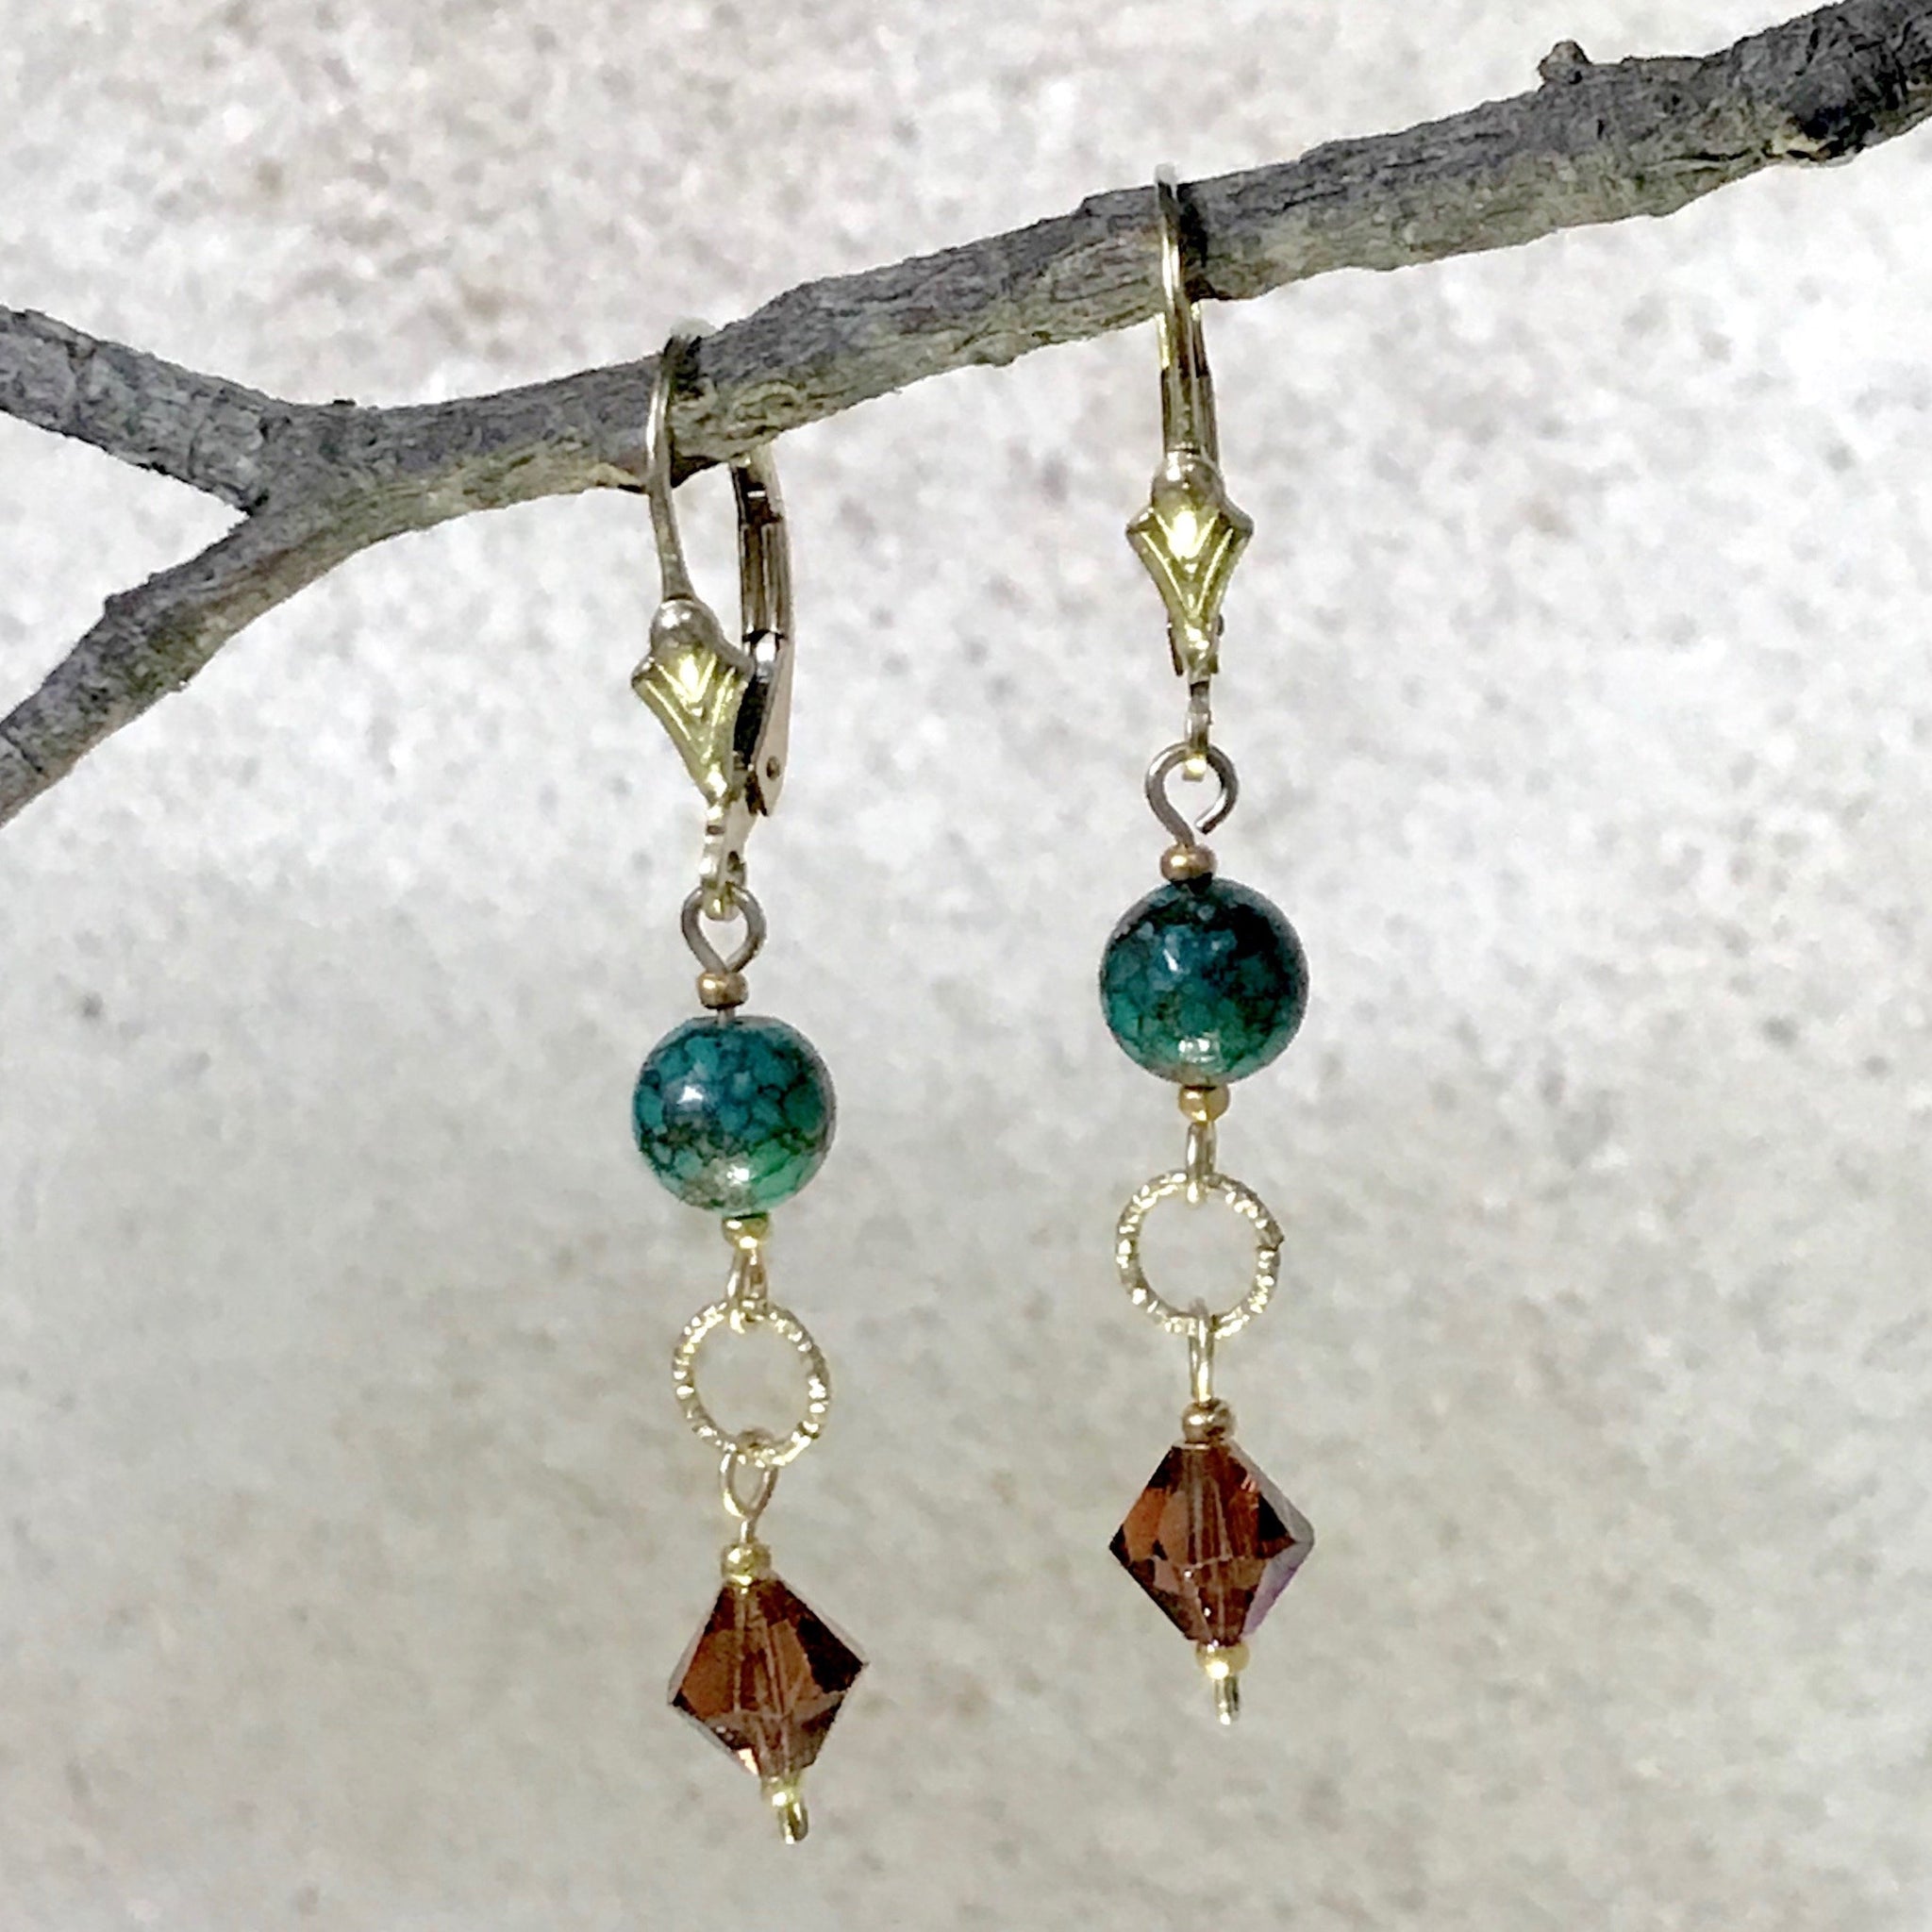 Sass 2 — Natural Turquoise and Crystal Earrings